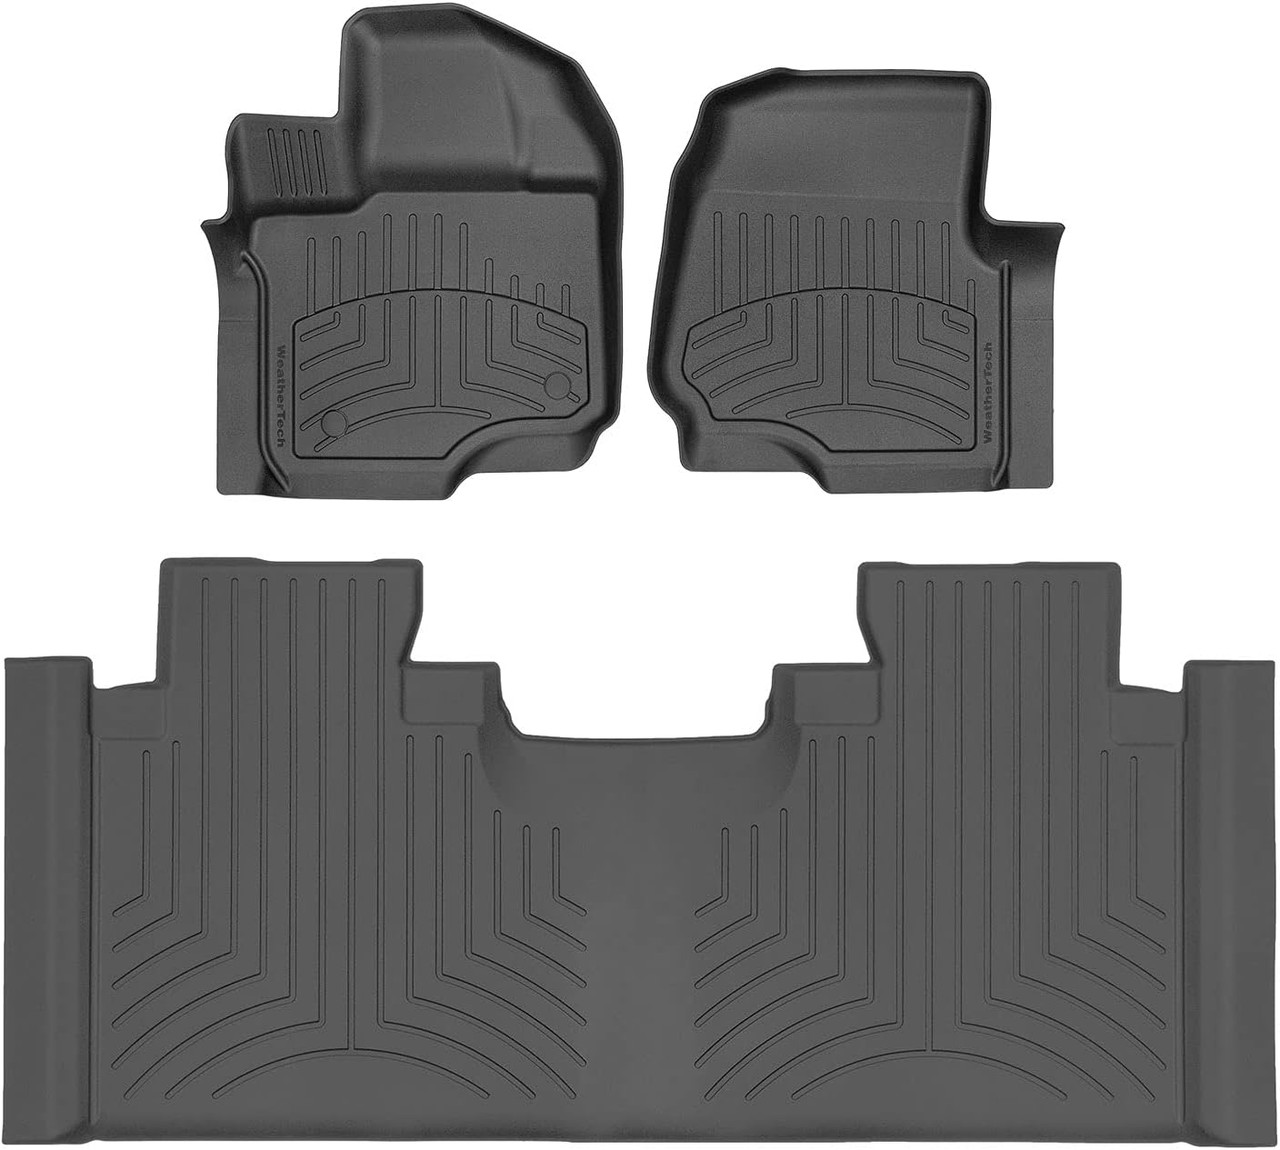 WeatherTech 15 Ford F-150 (Supercrew and Supercab) Front FloorLiners and Rear 3D Floor Mats - Black - 44697-1-3IM